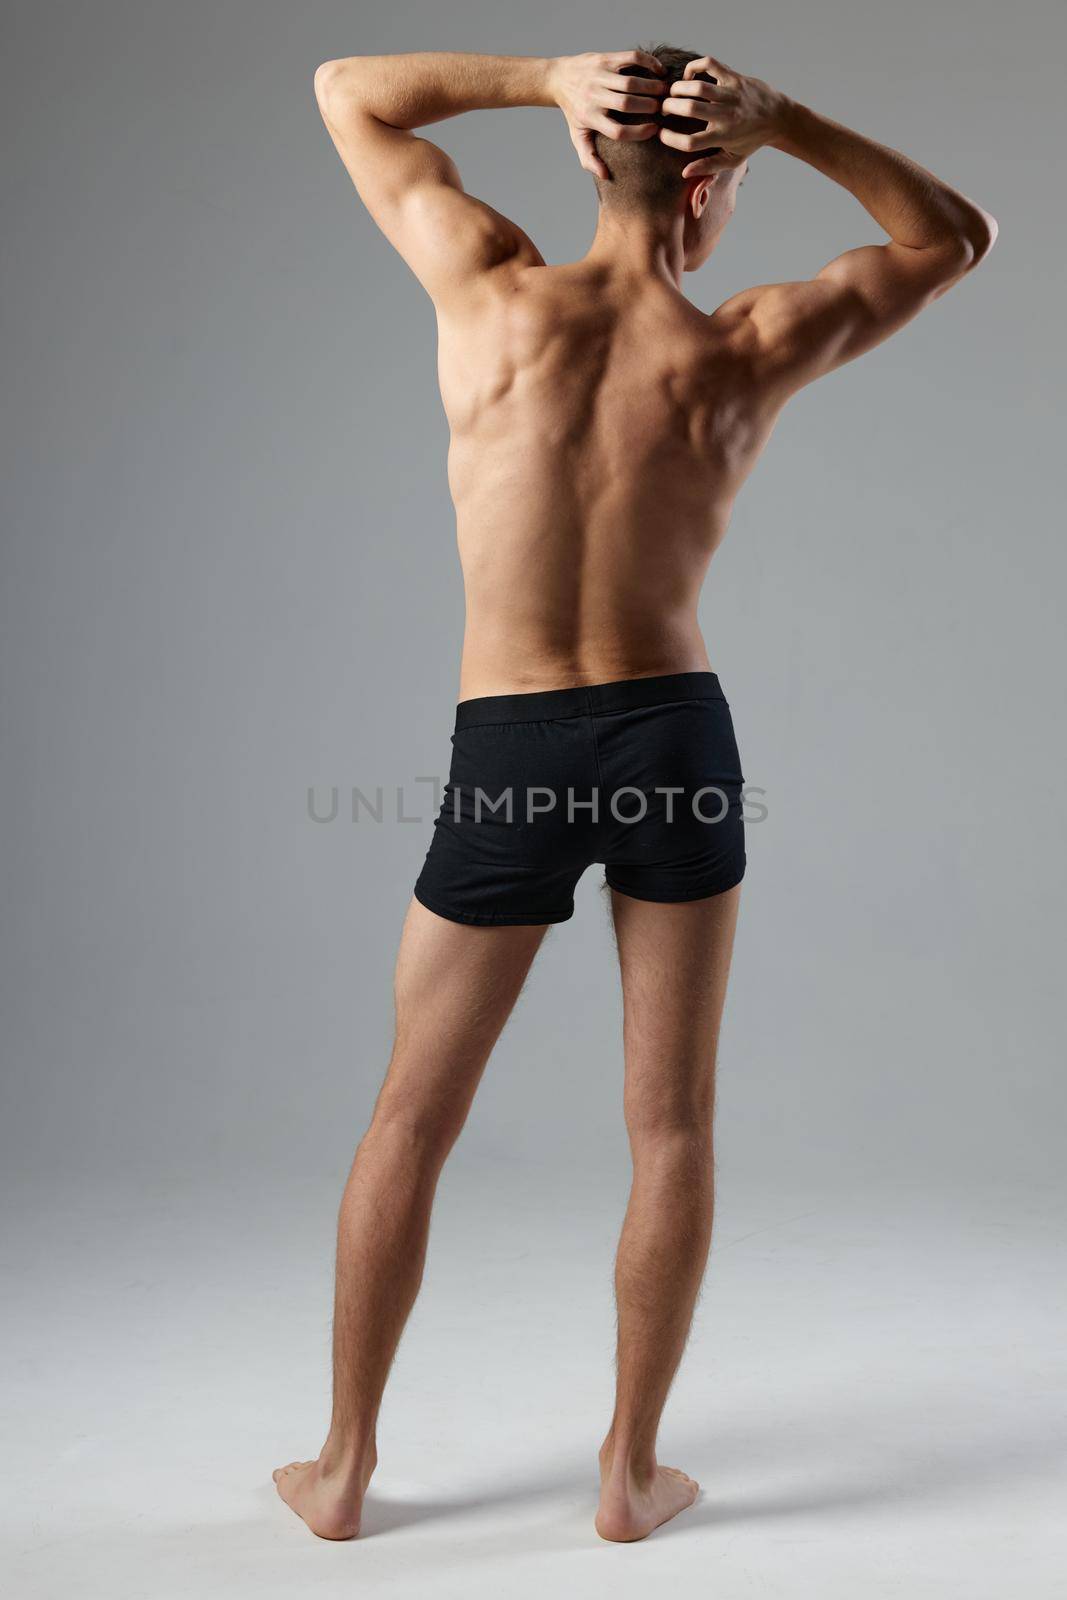 sporty man in black shorts holds hand on head back view workout fitness. High quality photo